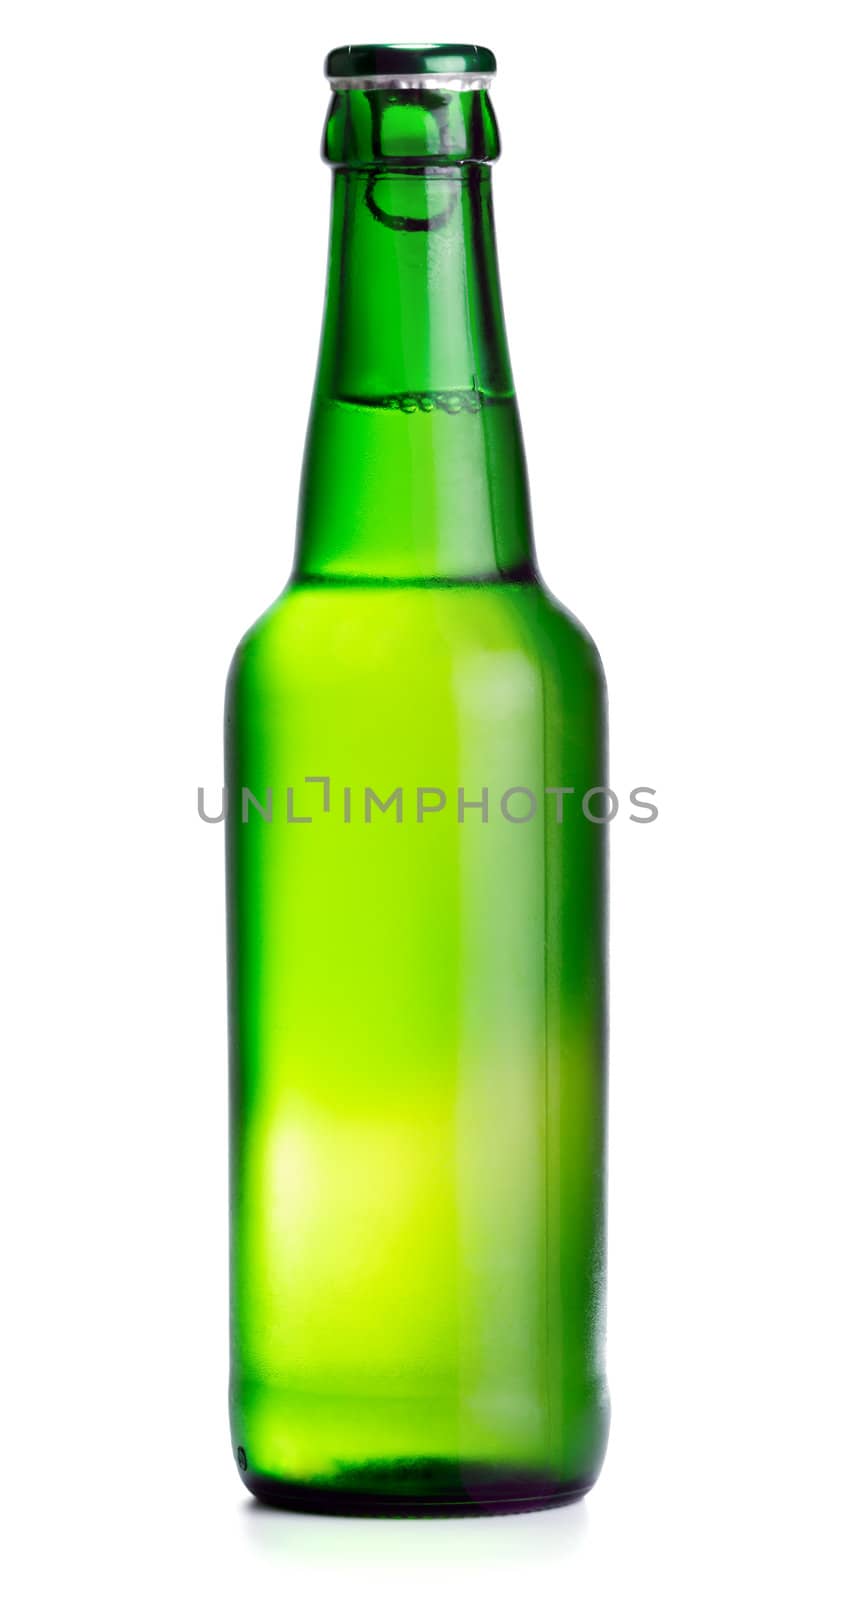 Green beer bottle on the white background by Bedolaga